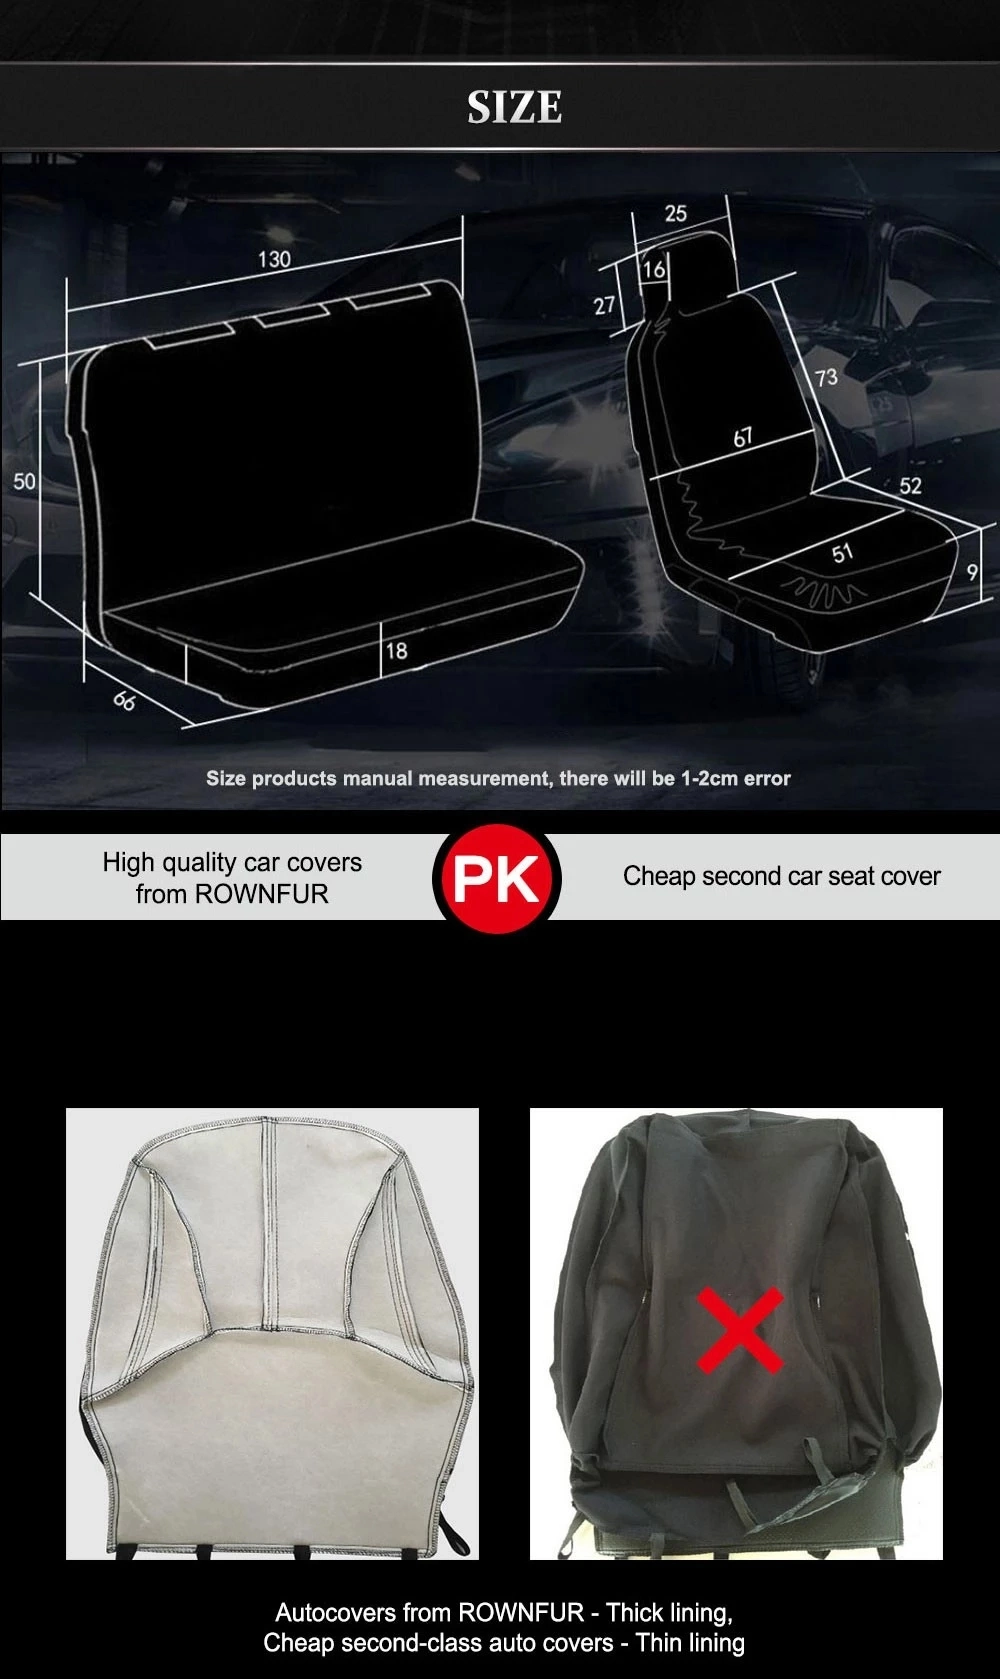 High Quality 3D Four Season Fashion Universal PU Leather Seat Cover for Car Seat Protector